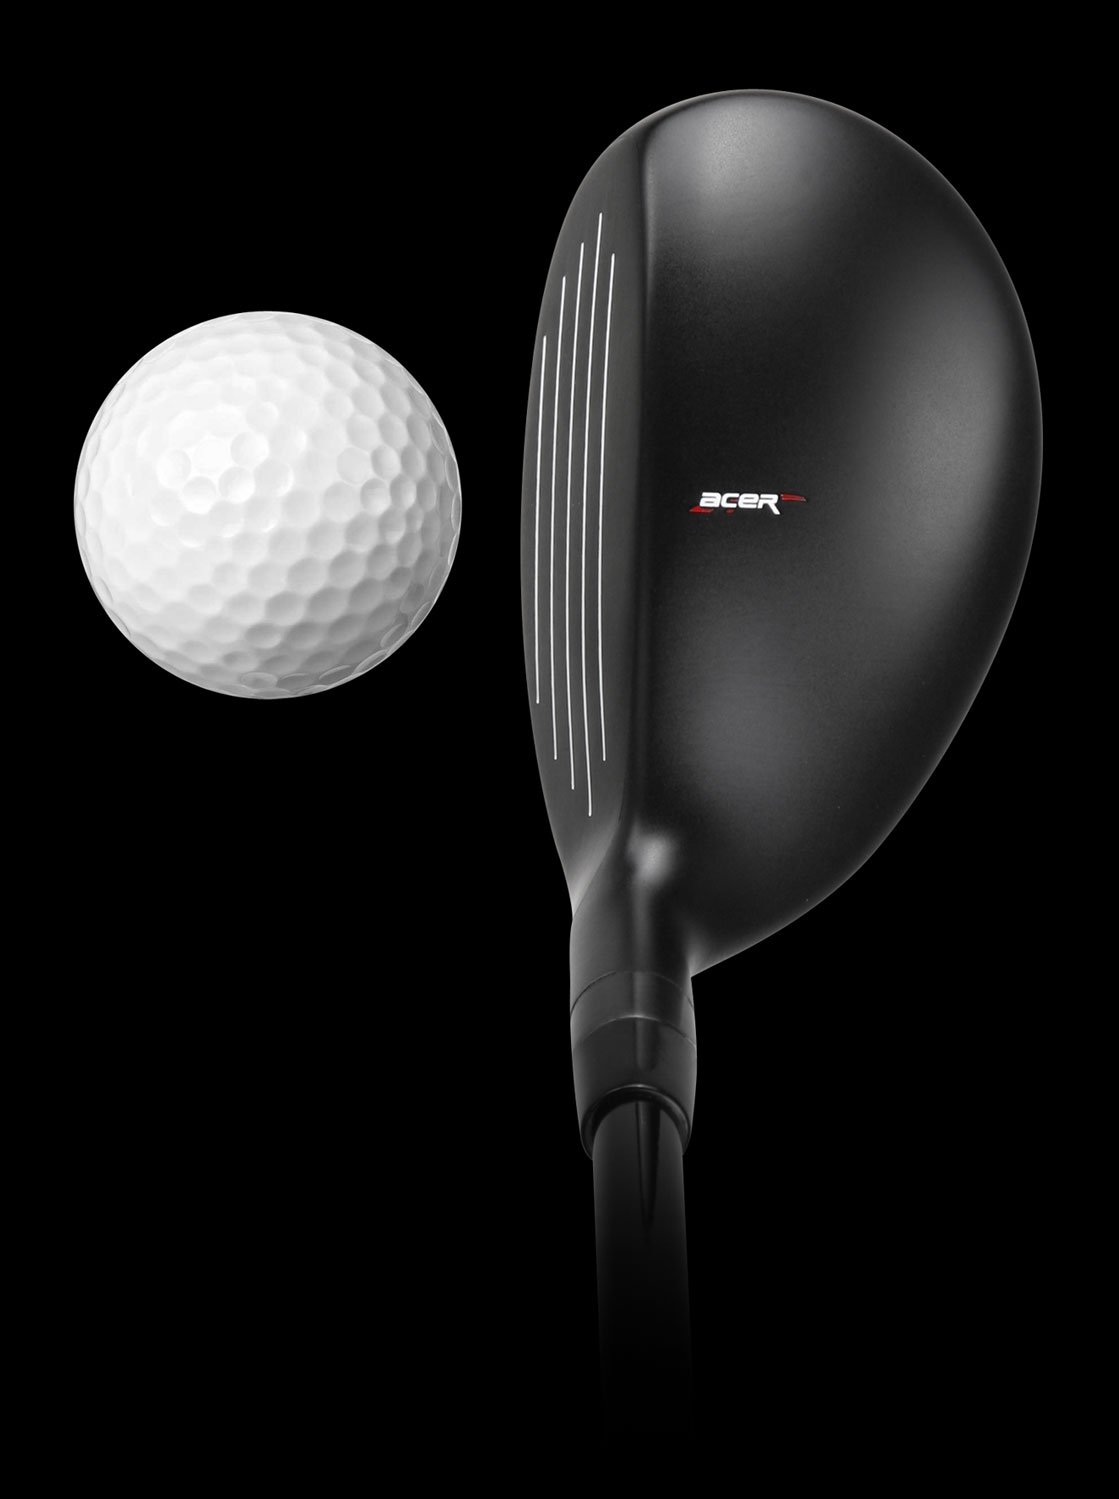 top view of an Acer SR1 hybrid with a golf ball in front of the face